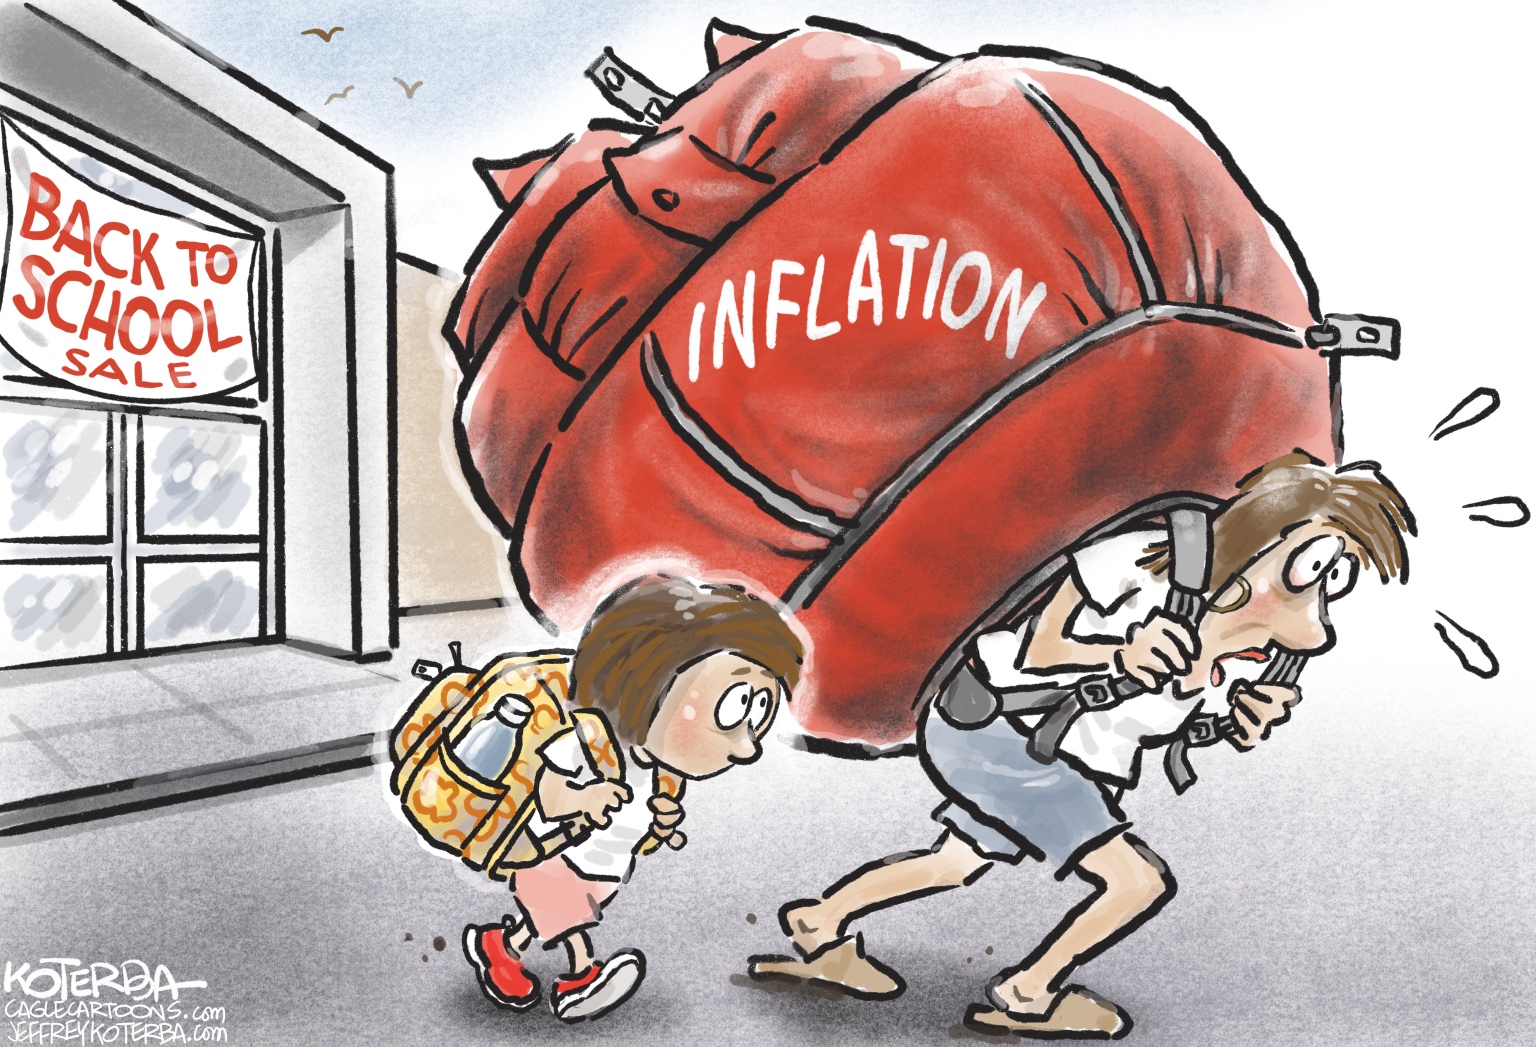 Editorial Cartoon: Back to School With Inflation - The Independent | News  Events Opinion More